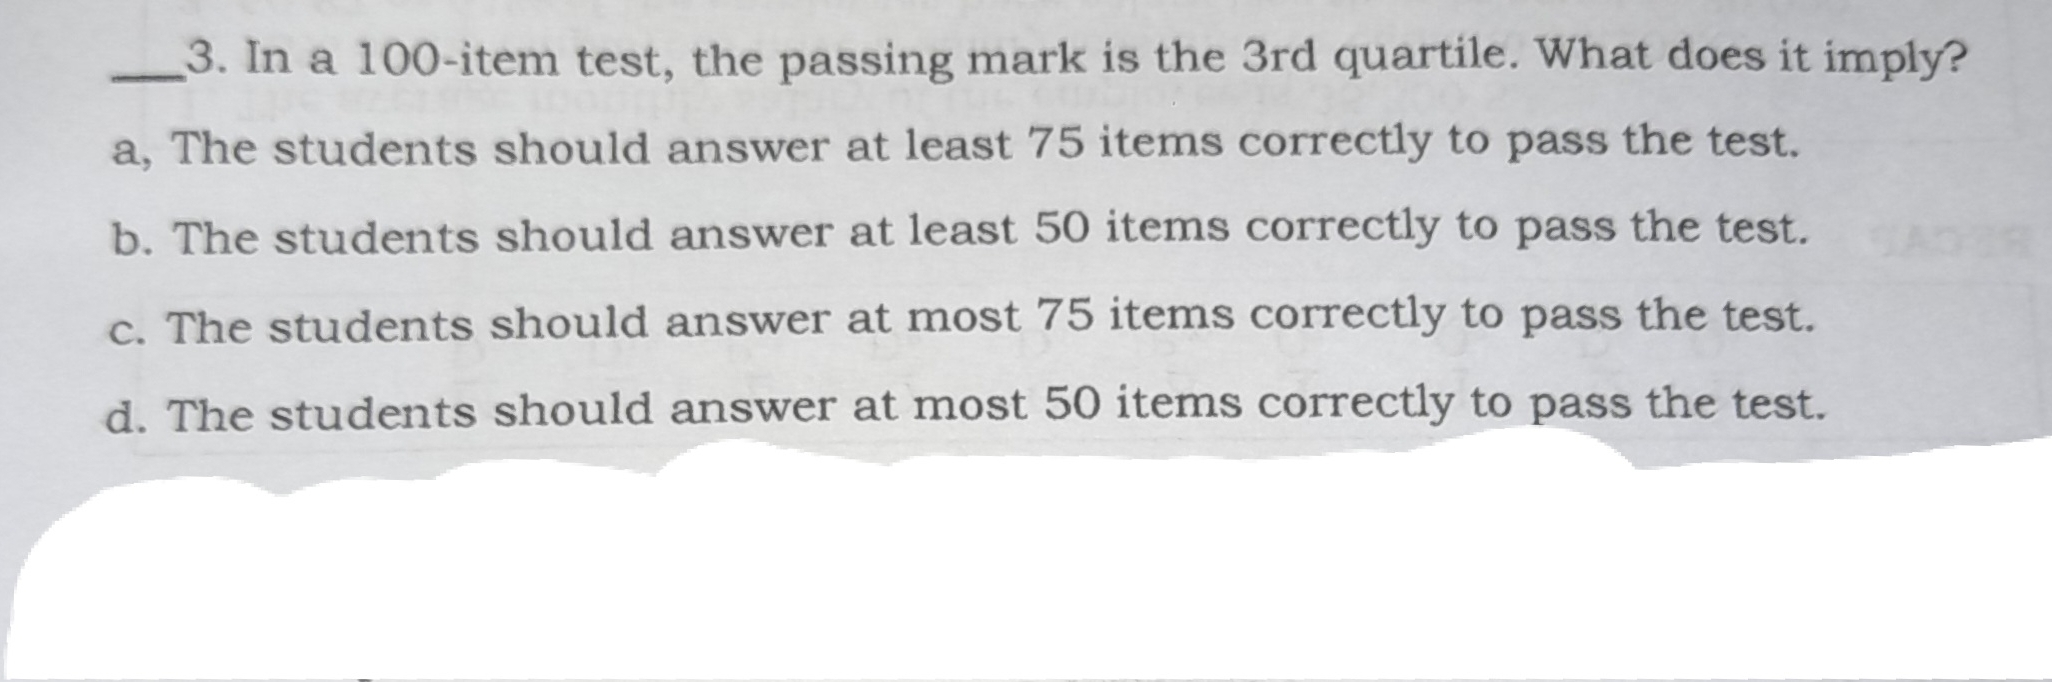 3. In a 100-item test, the passing mark is the 3rd quartile. What does it imply? a, The students should answer at least 75 items correctly to pass the test. b. The students should answer at least 50 items correctly to pass the test. c. The students should answer at most 75 items correctly to pass the test. d. The students should answer at most 50 items correctly to pass the test.